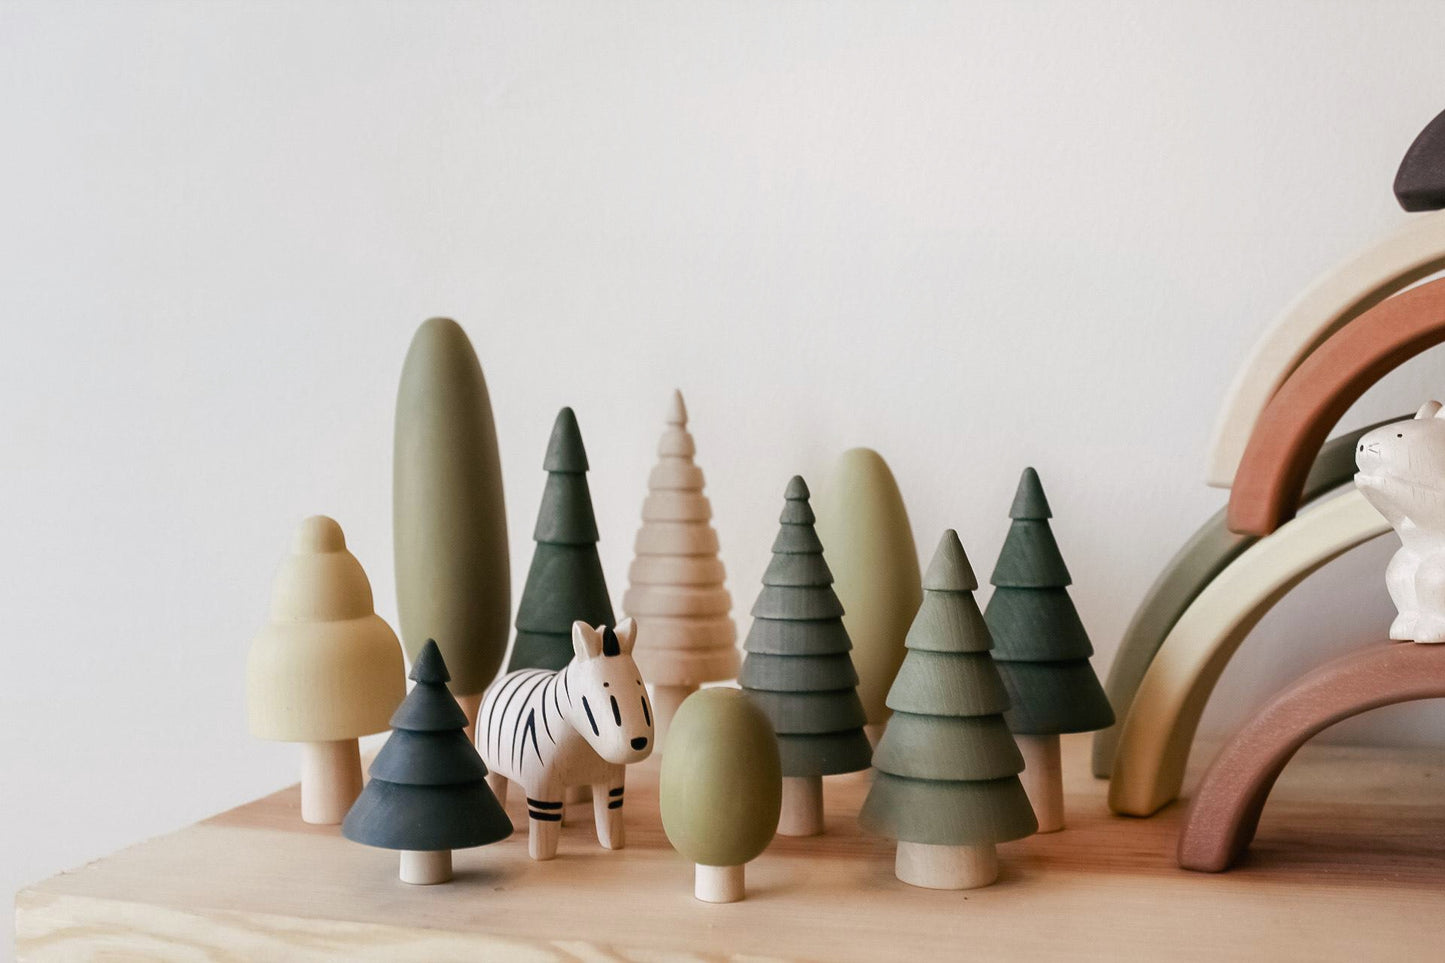 Wooden forest green 10-pcs Trees